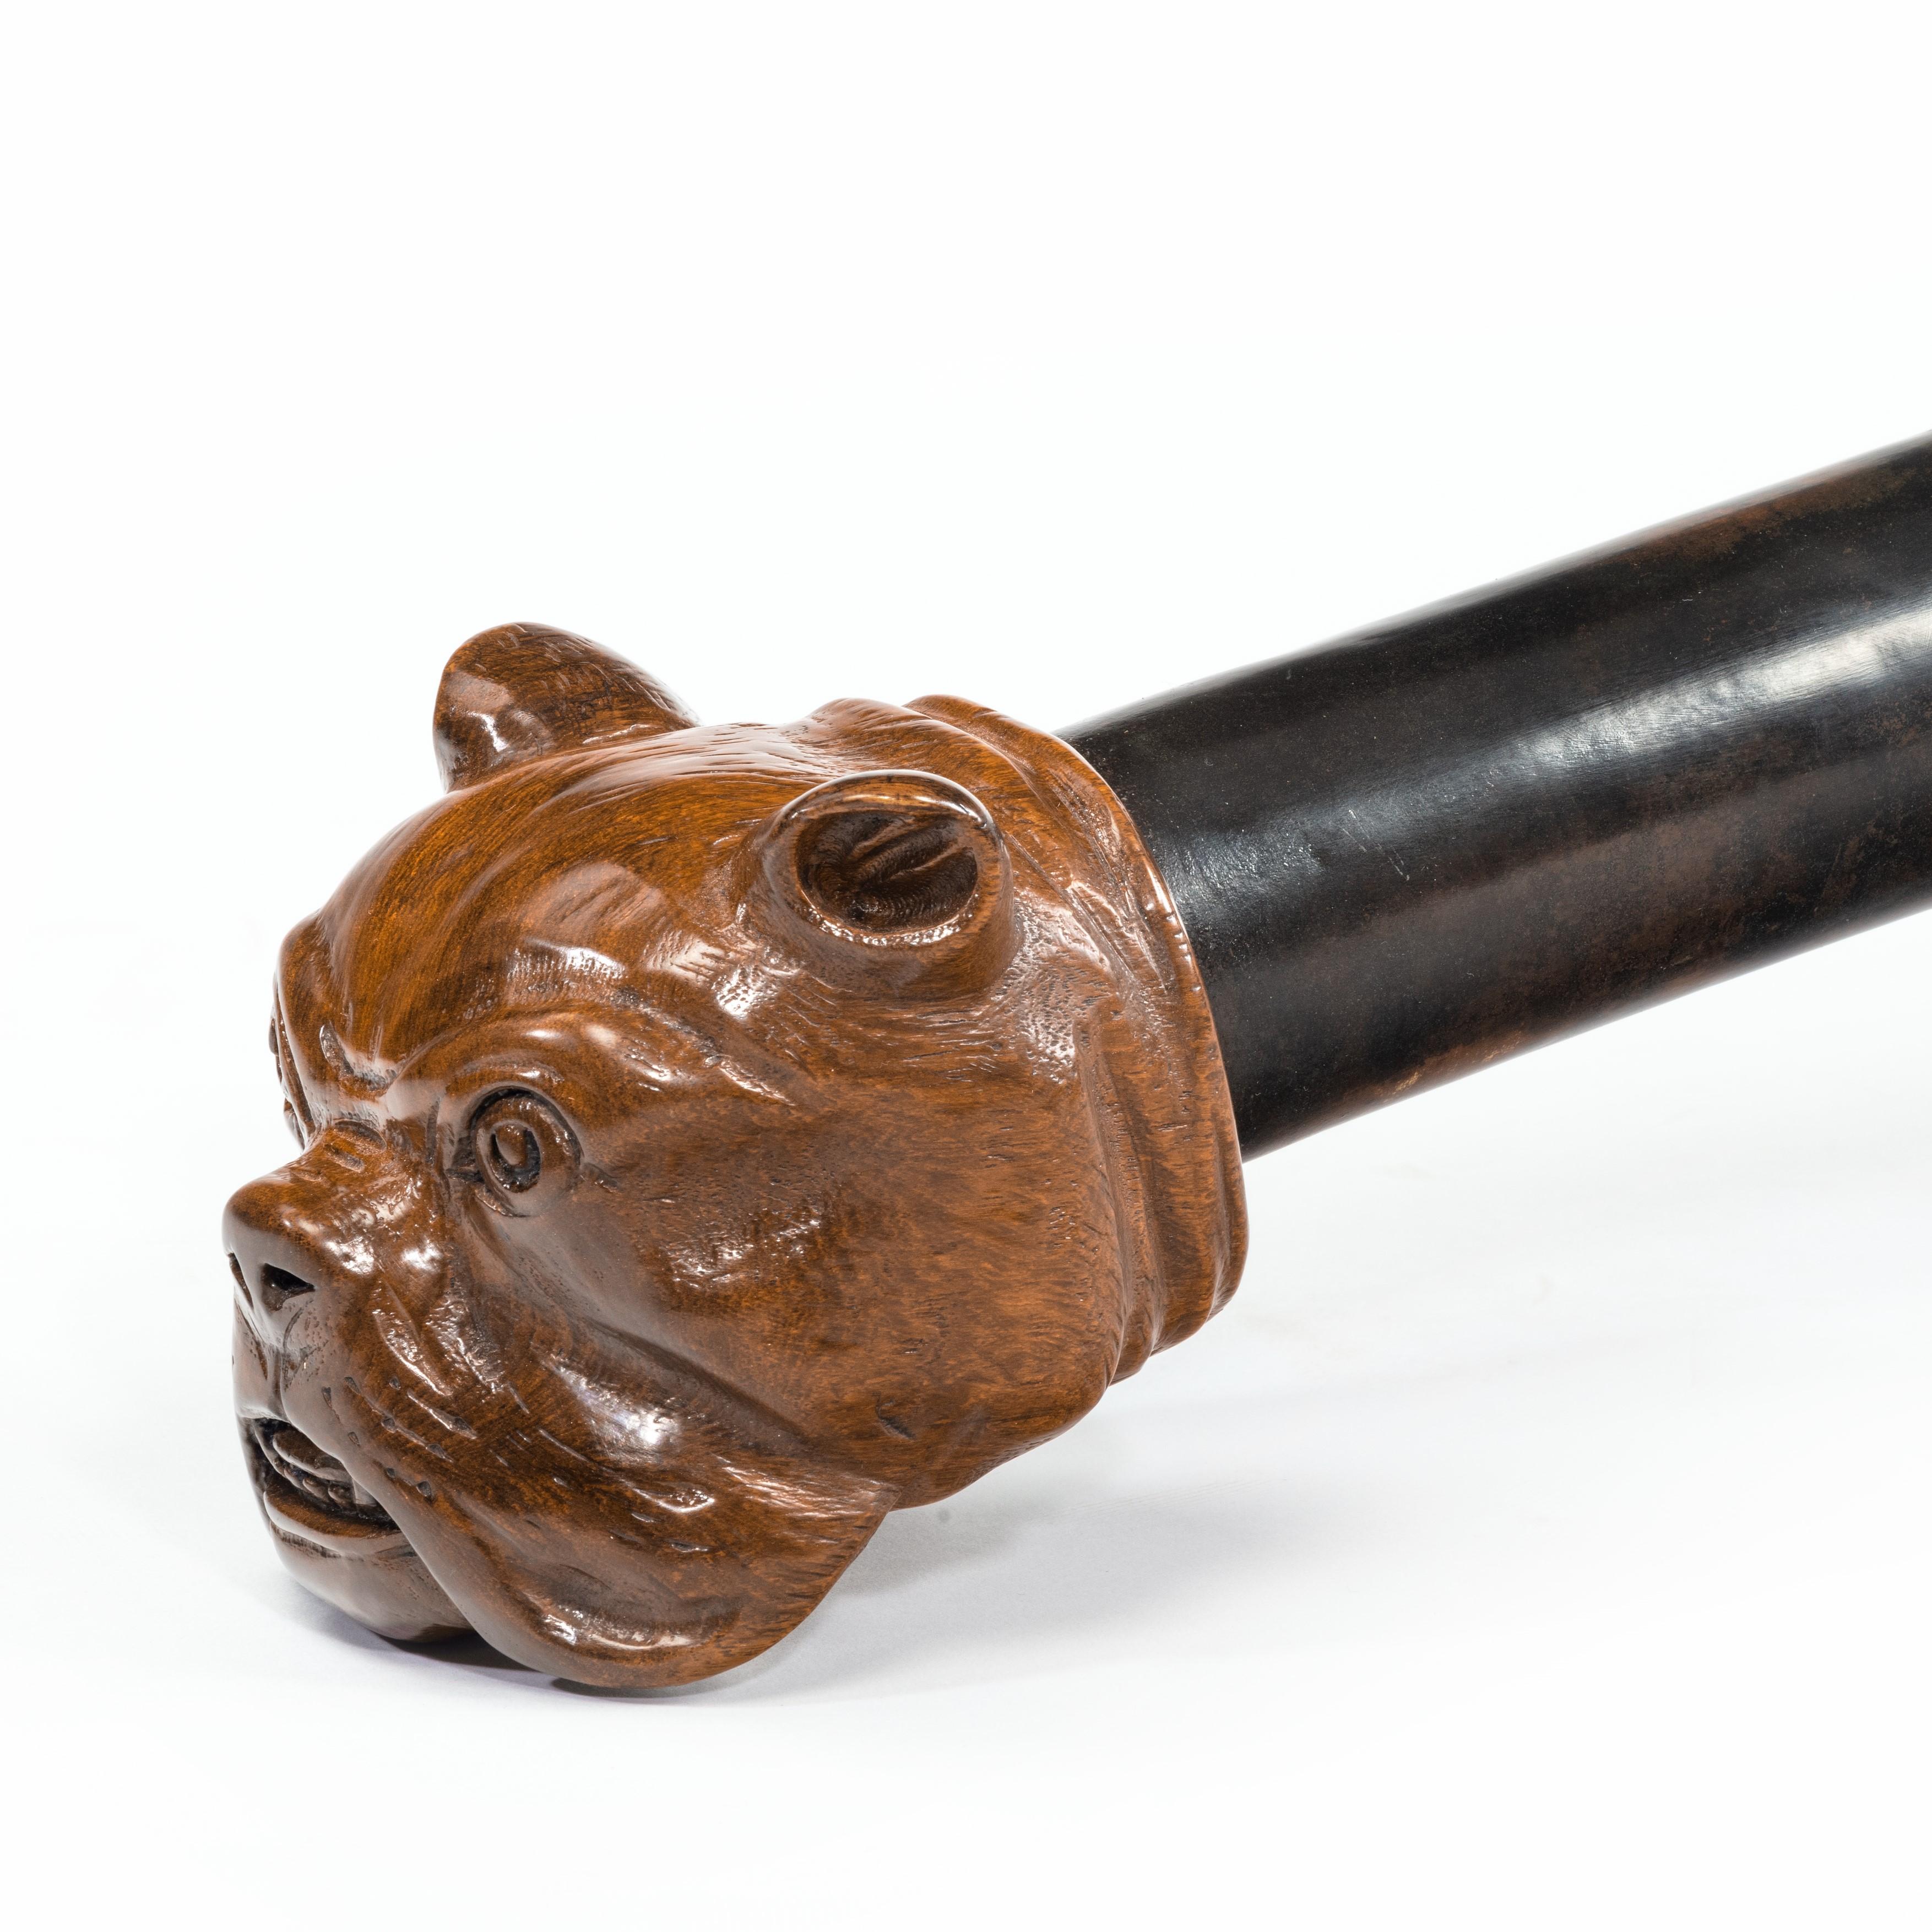 A teak ship’s tiller with a bulldog’s head, spirally carved and with old copper rivet repairs, English, circa 1900.
Measures: L 51 1/2in (131cm).
  